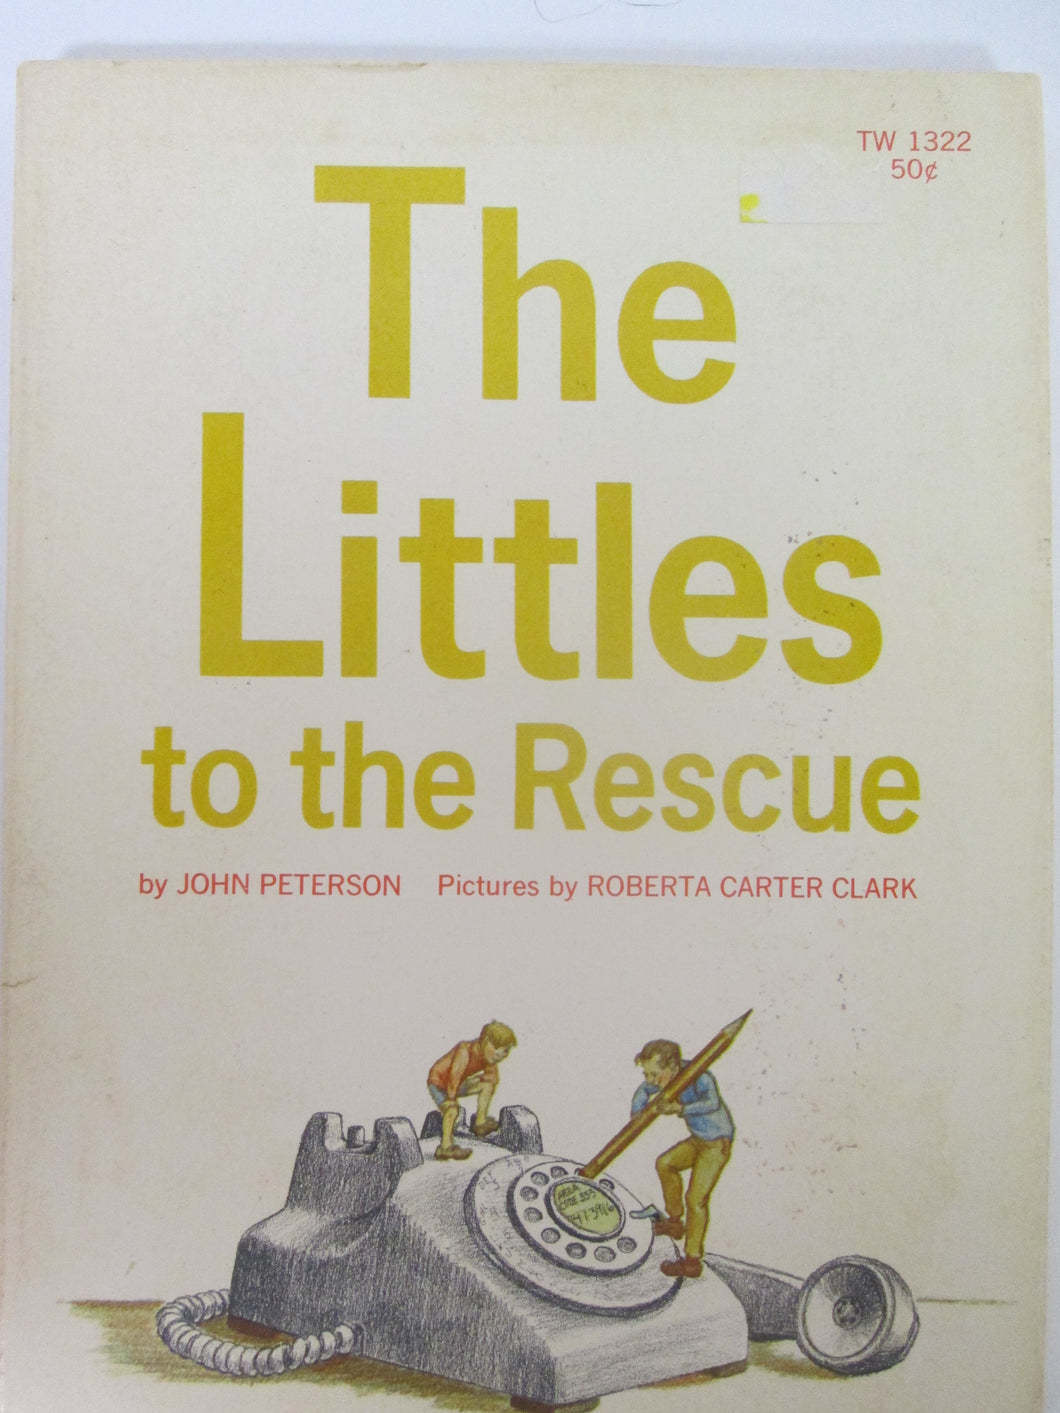 The Littles to the Rescue by John Peterson PB 1968